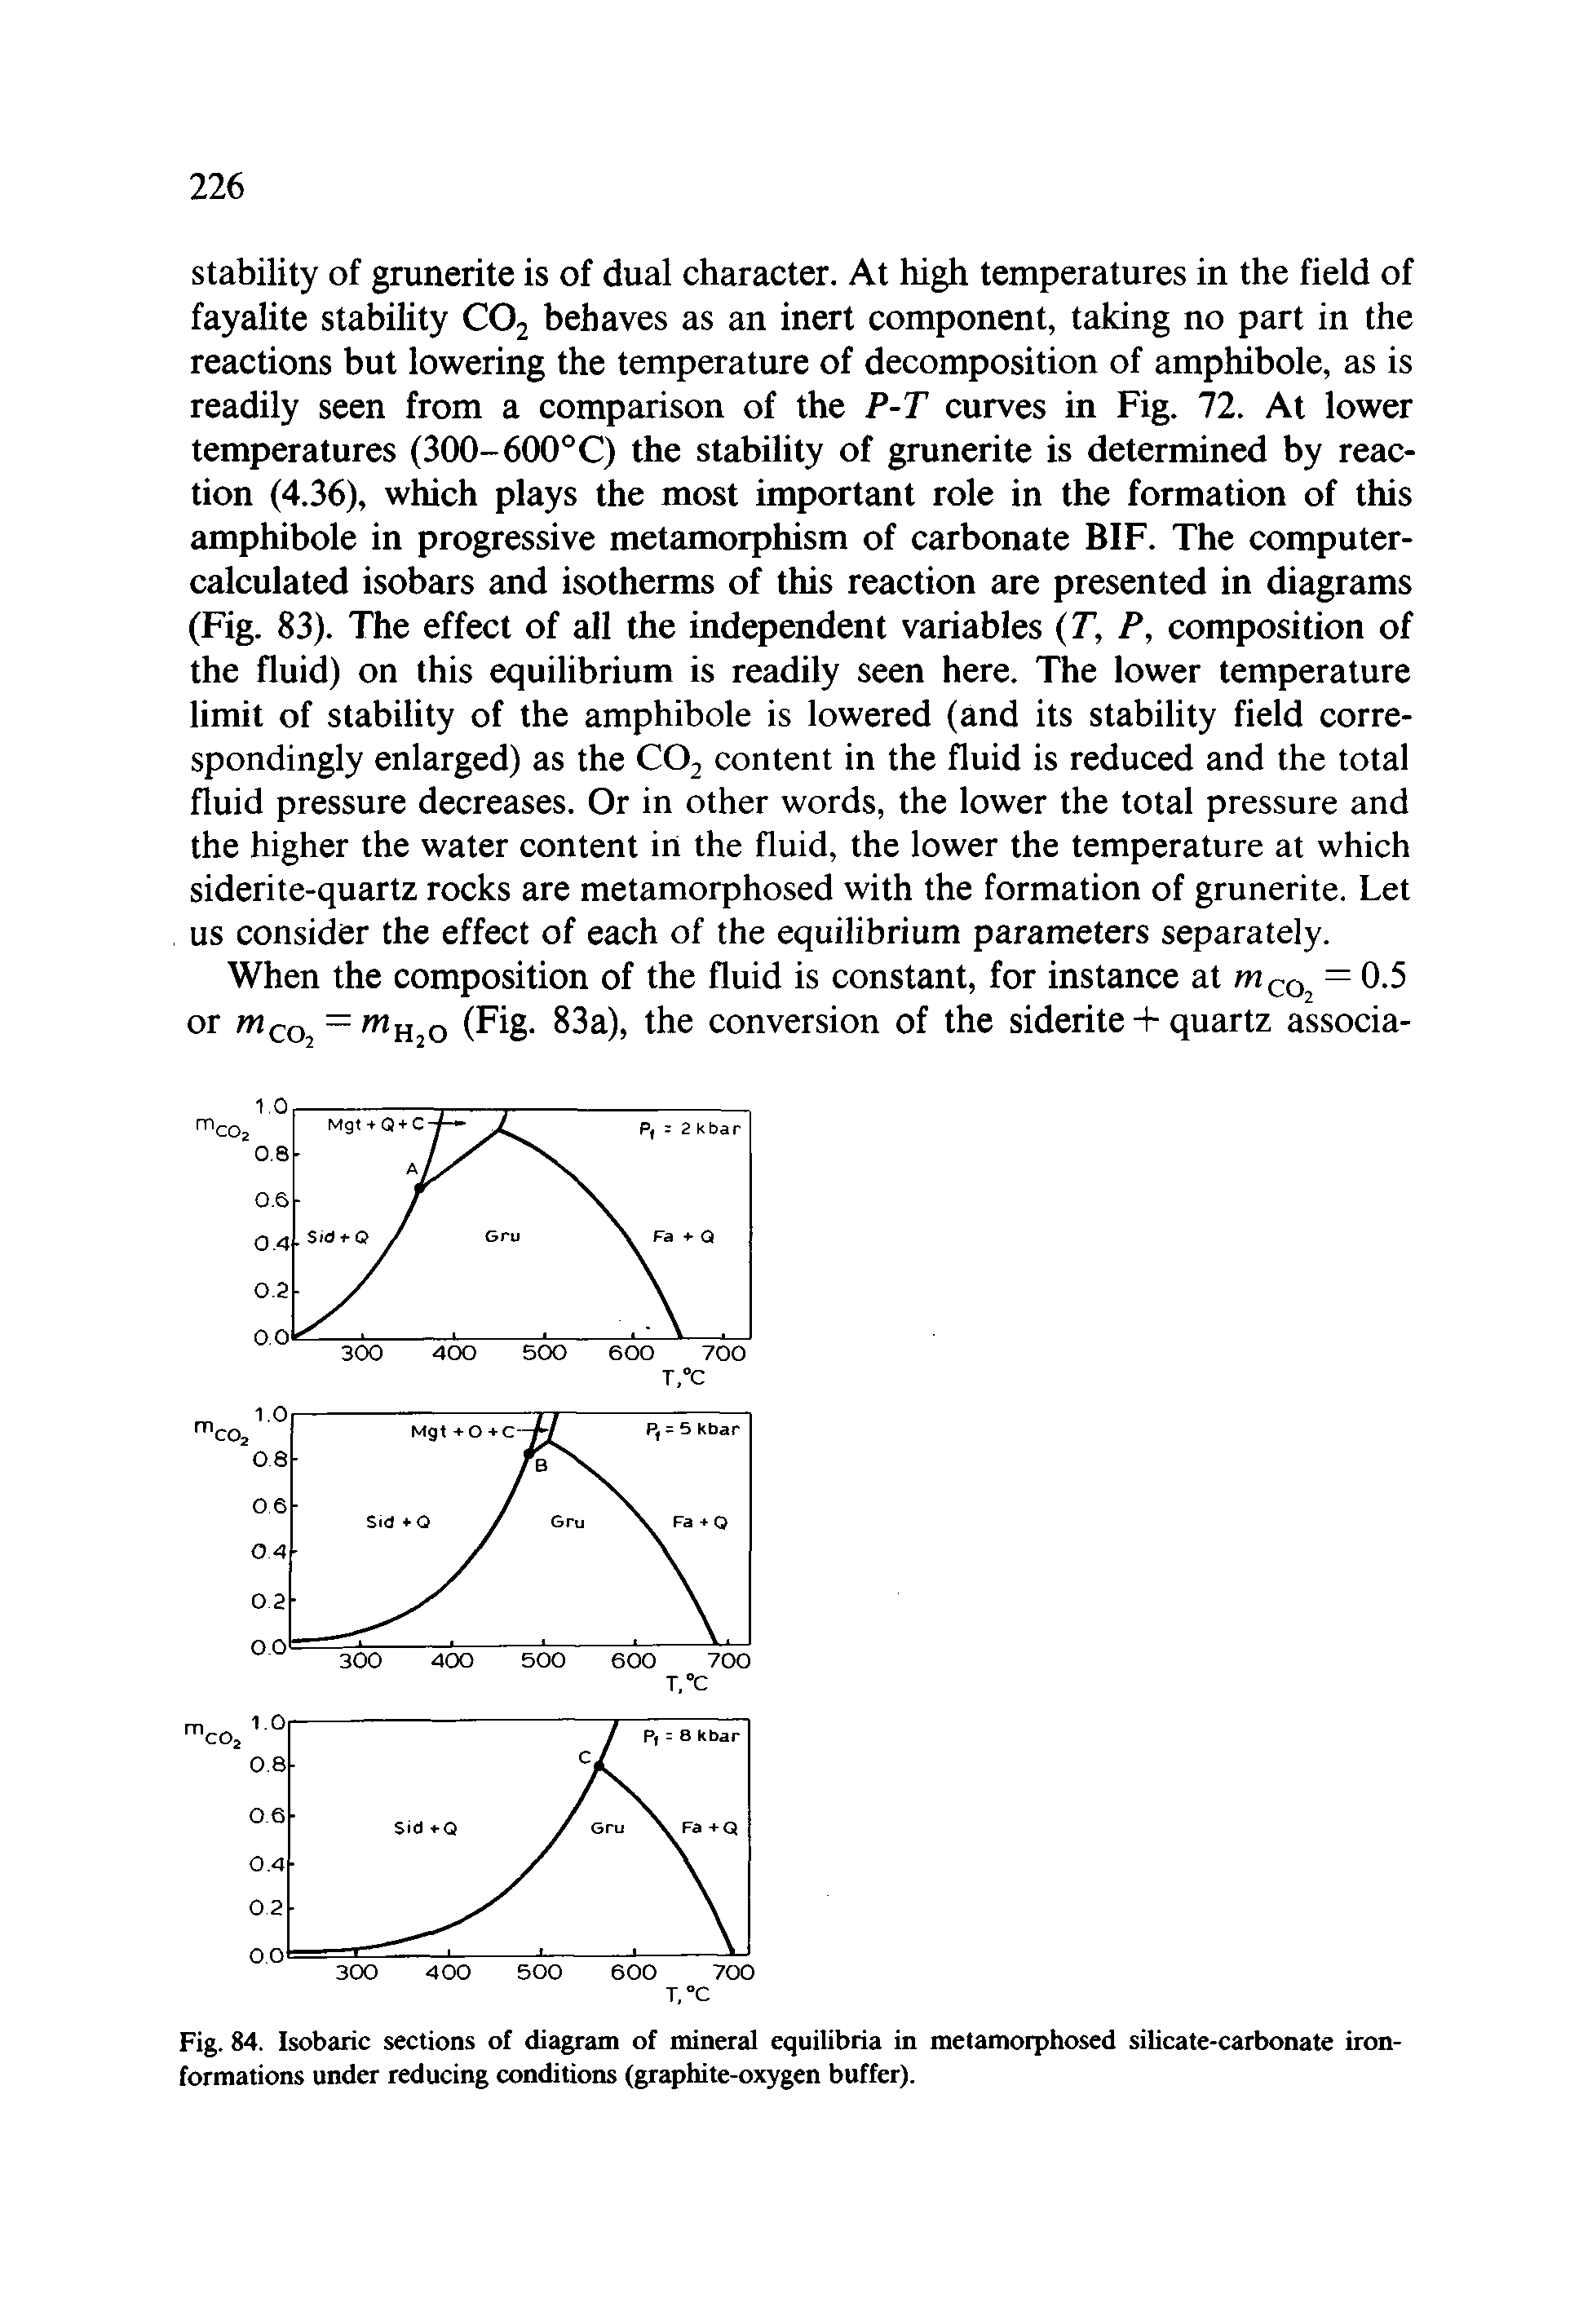 Fig. 84. Isobaric sections of diagram of mineral equilibria in metamorphosed silicate-carbonate iron-formations under reducing conditions (graphite-oxygen buffer).